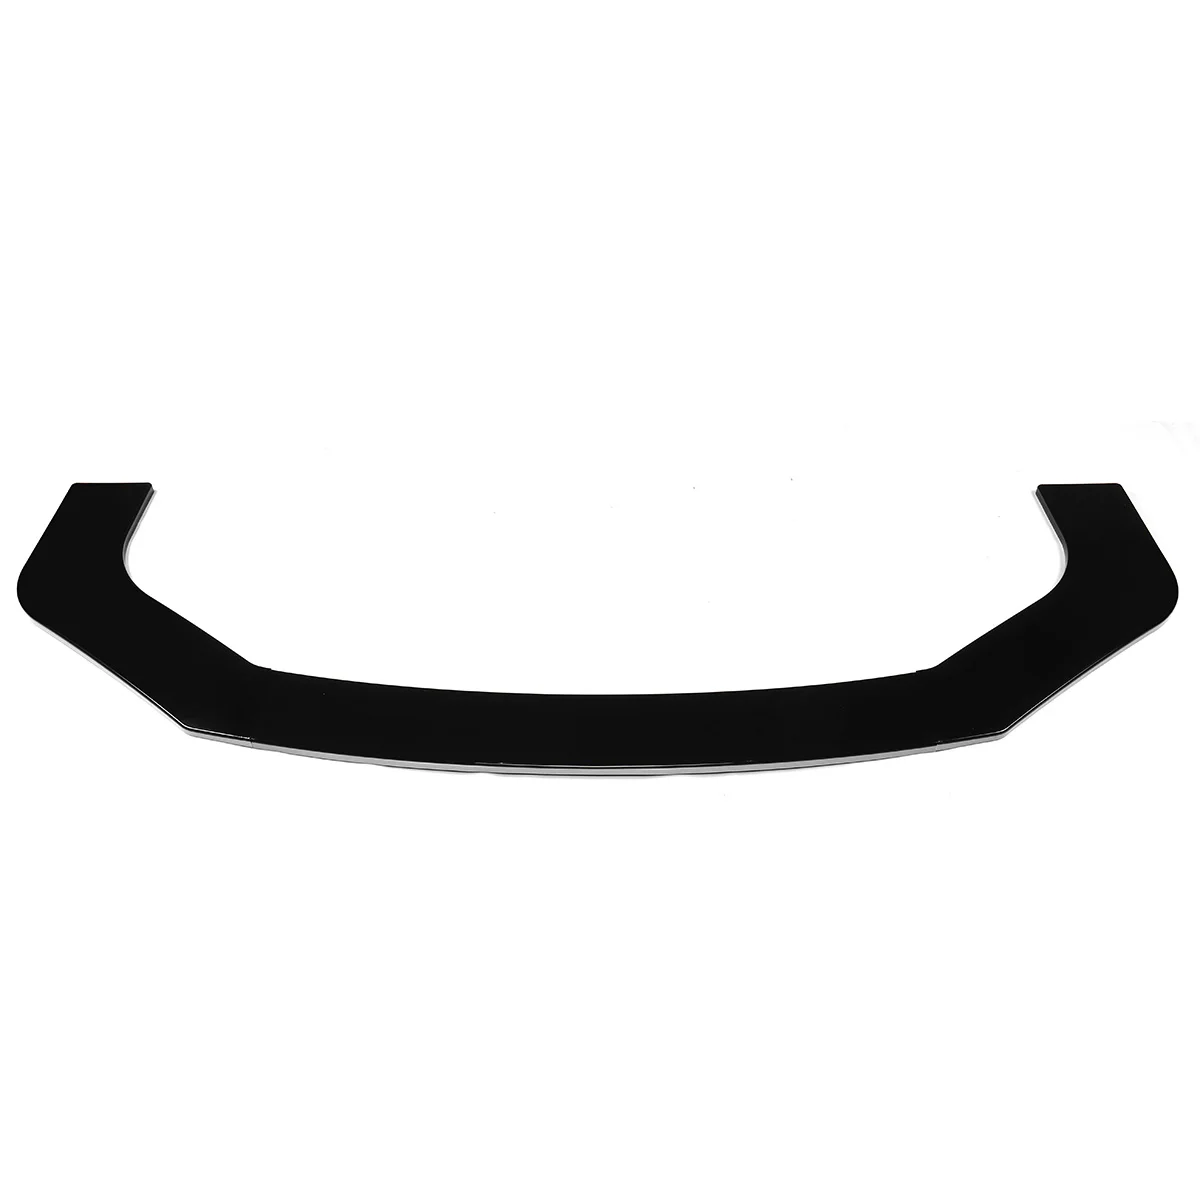 

Universal Car Front Bumper Splitter Lip Body Kit Diffuser Guard For LEXUS IS200T IS250 IS350 ISF GS350 GS450H NX200T NX300H RC-F